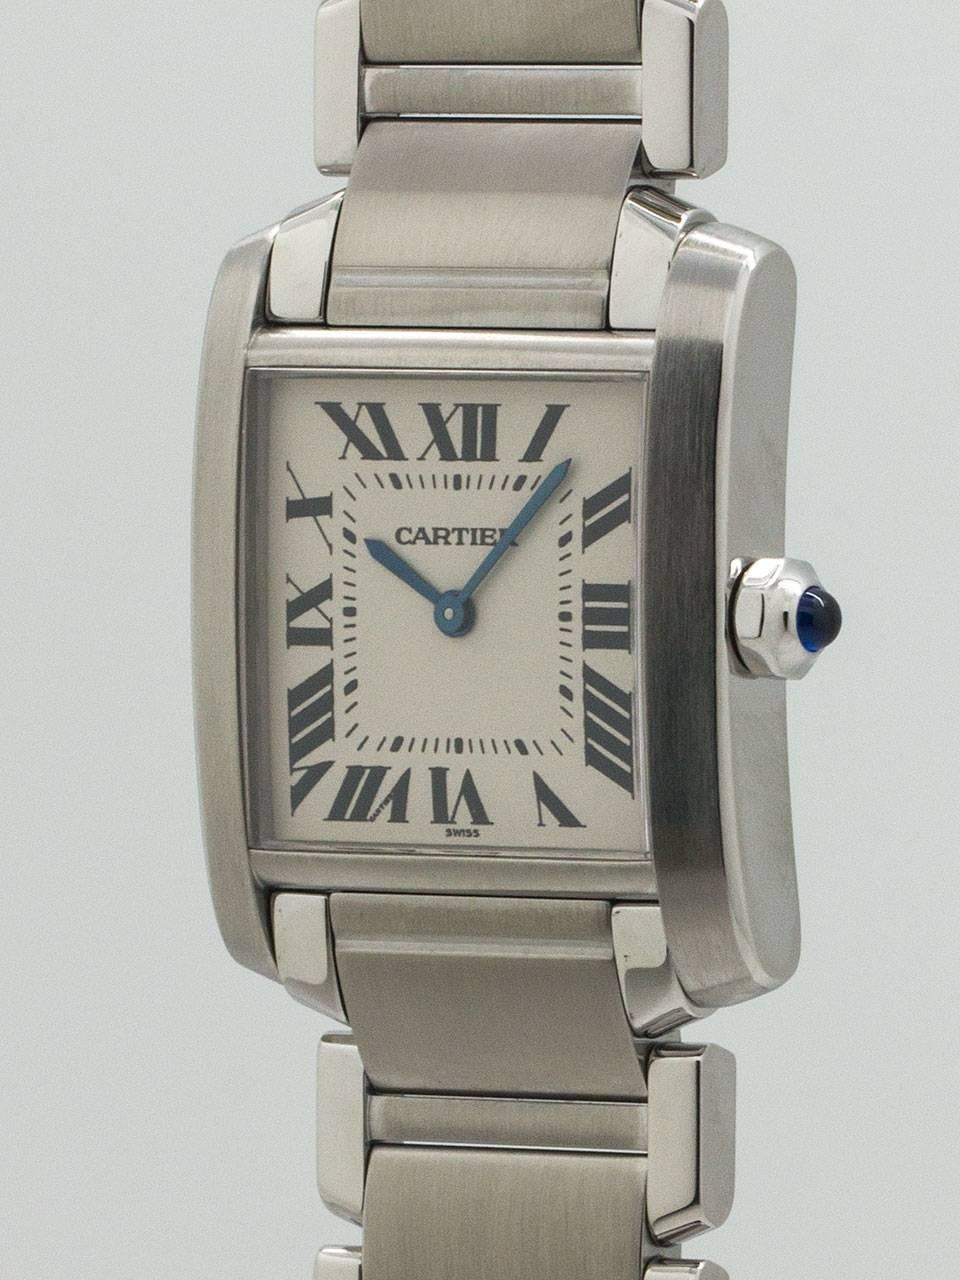 Cartier Stainless Steel Midsize Tank Francaise 26 X 35 mm classic white dial w/ Roman numerals and blue steel hands and sapphire cabochon crown. Battery powered quartz movement. With stainless steel bracelet with  butterfly deployment clasp. Very